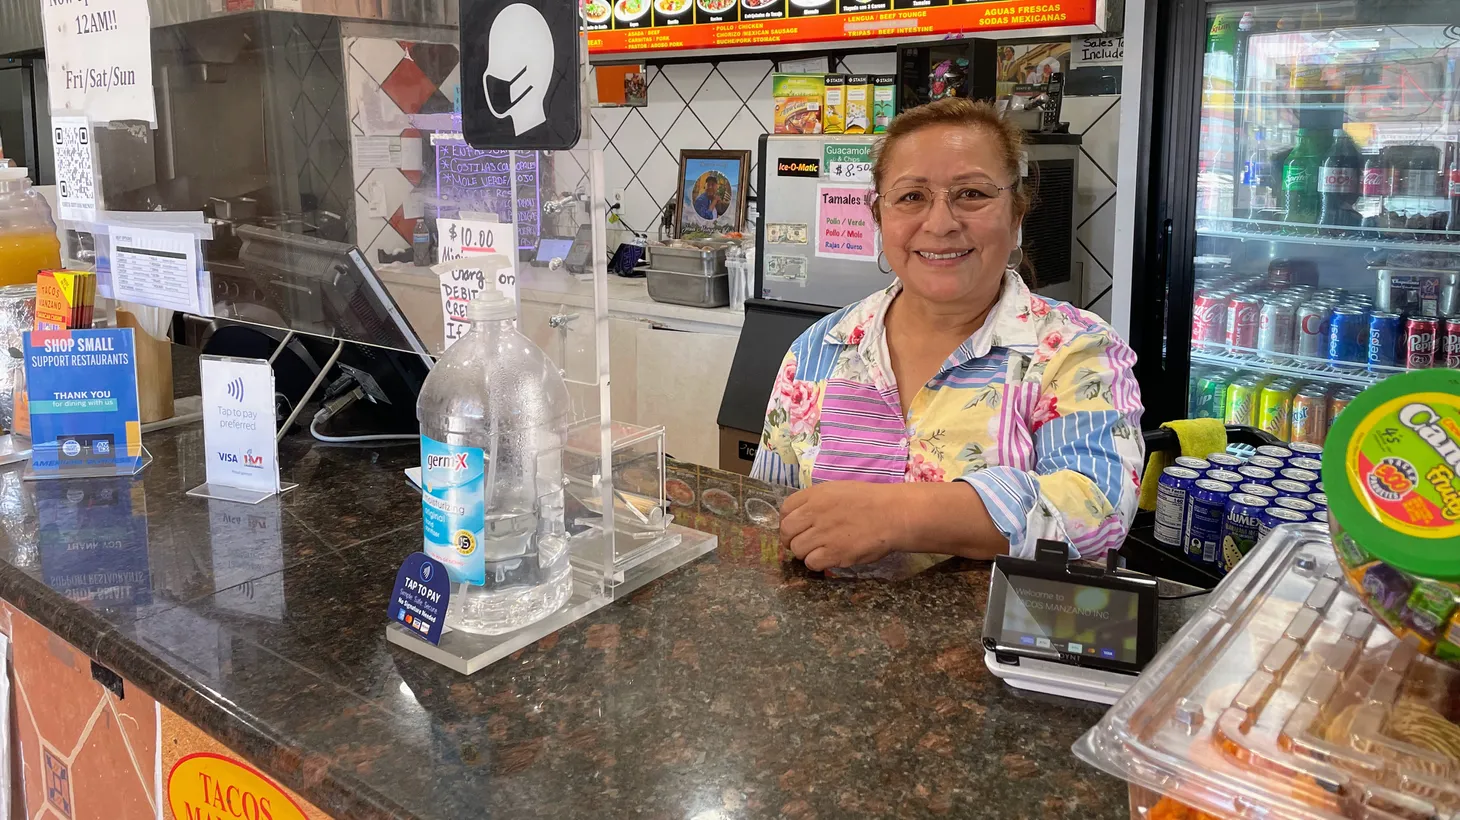 Socorro Manzano recently raised menu prices at her restaurant Tacos Manzano in North Hollywood. Record high inflation is affecting all parts of her business, from ingredients to employee wages.